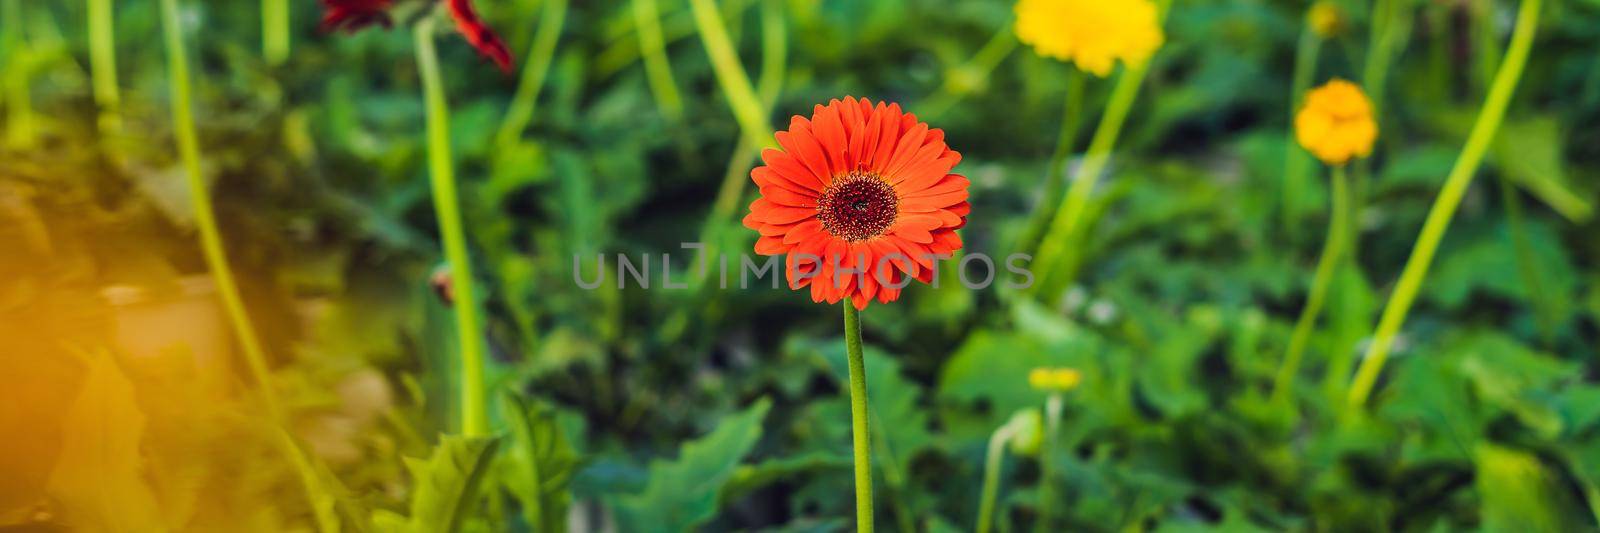 Flower cultivation in greenhouses. A hothouse with gerbers. Daisy flowers plants in greenhouse. BANNER long format